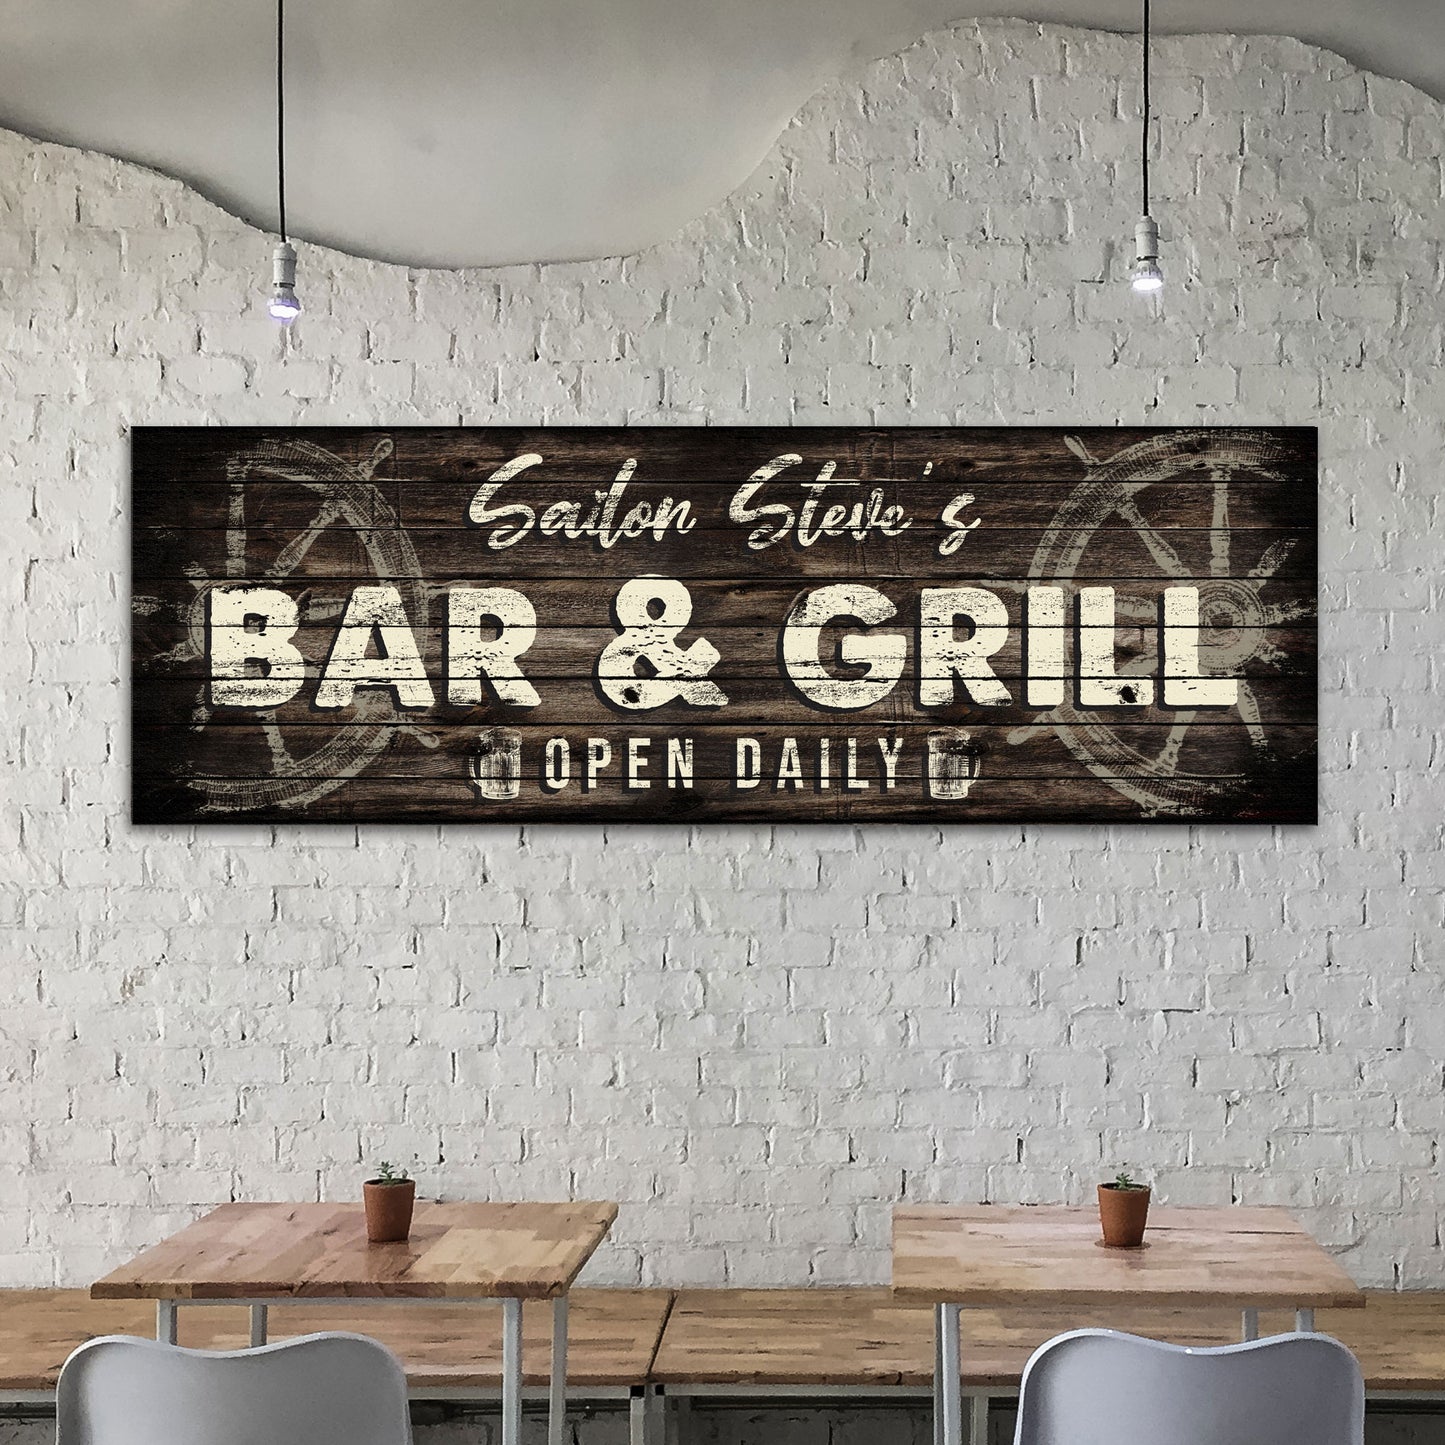 Sailor Bar And Grill Open Daily Sign - Image by Tailored Canvases